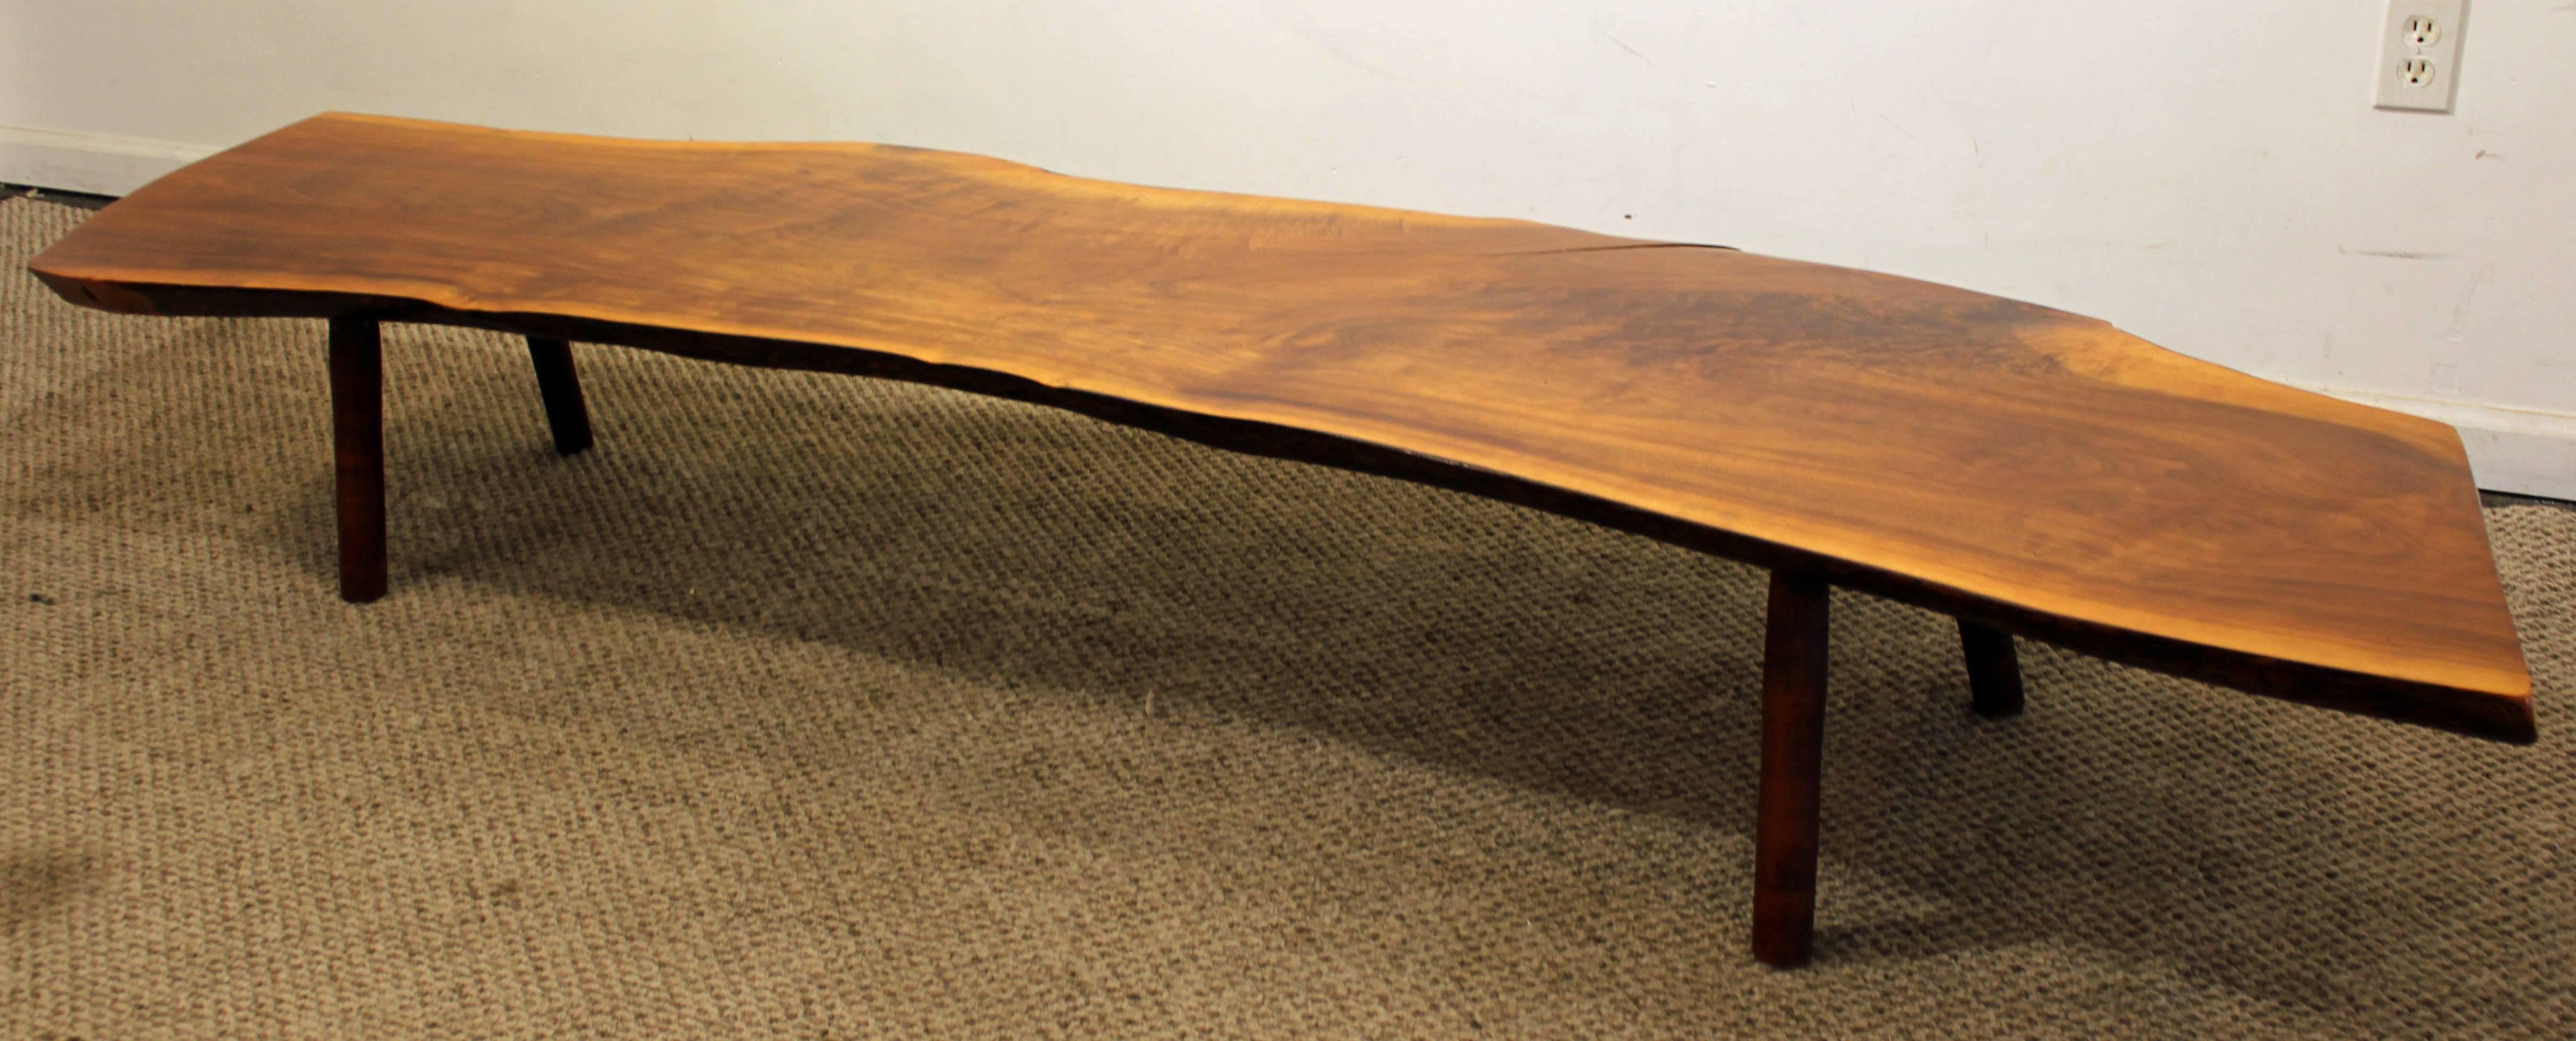 Offered is a live-edge walnut slab coffee table, similar to the style of Nakashima. It has a solid wood walnut slab with a finished top and sides on four wooden legs. It was made in a New Hope art studio in the 1970's.